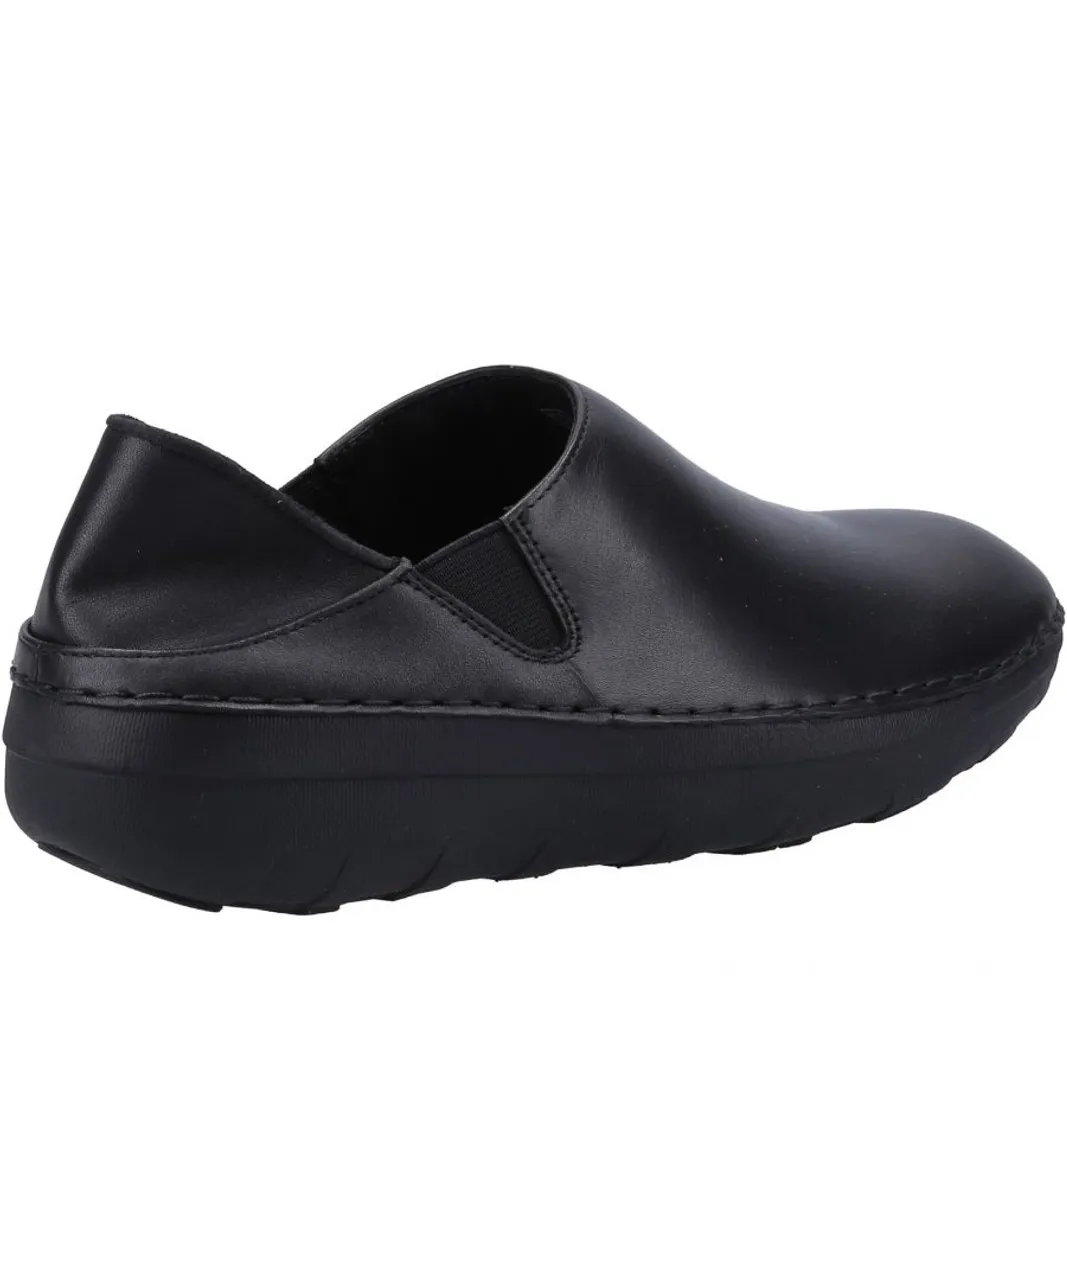 Fitflop Womens Superloafer Slip On Ladies Shoes - Black Leather